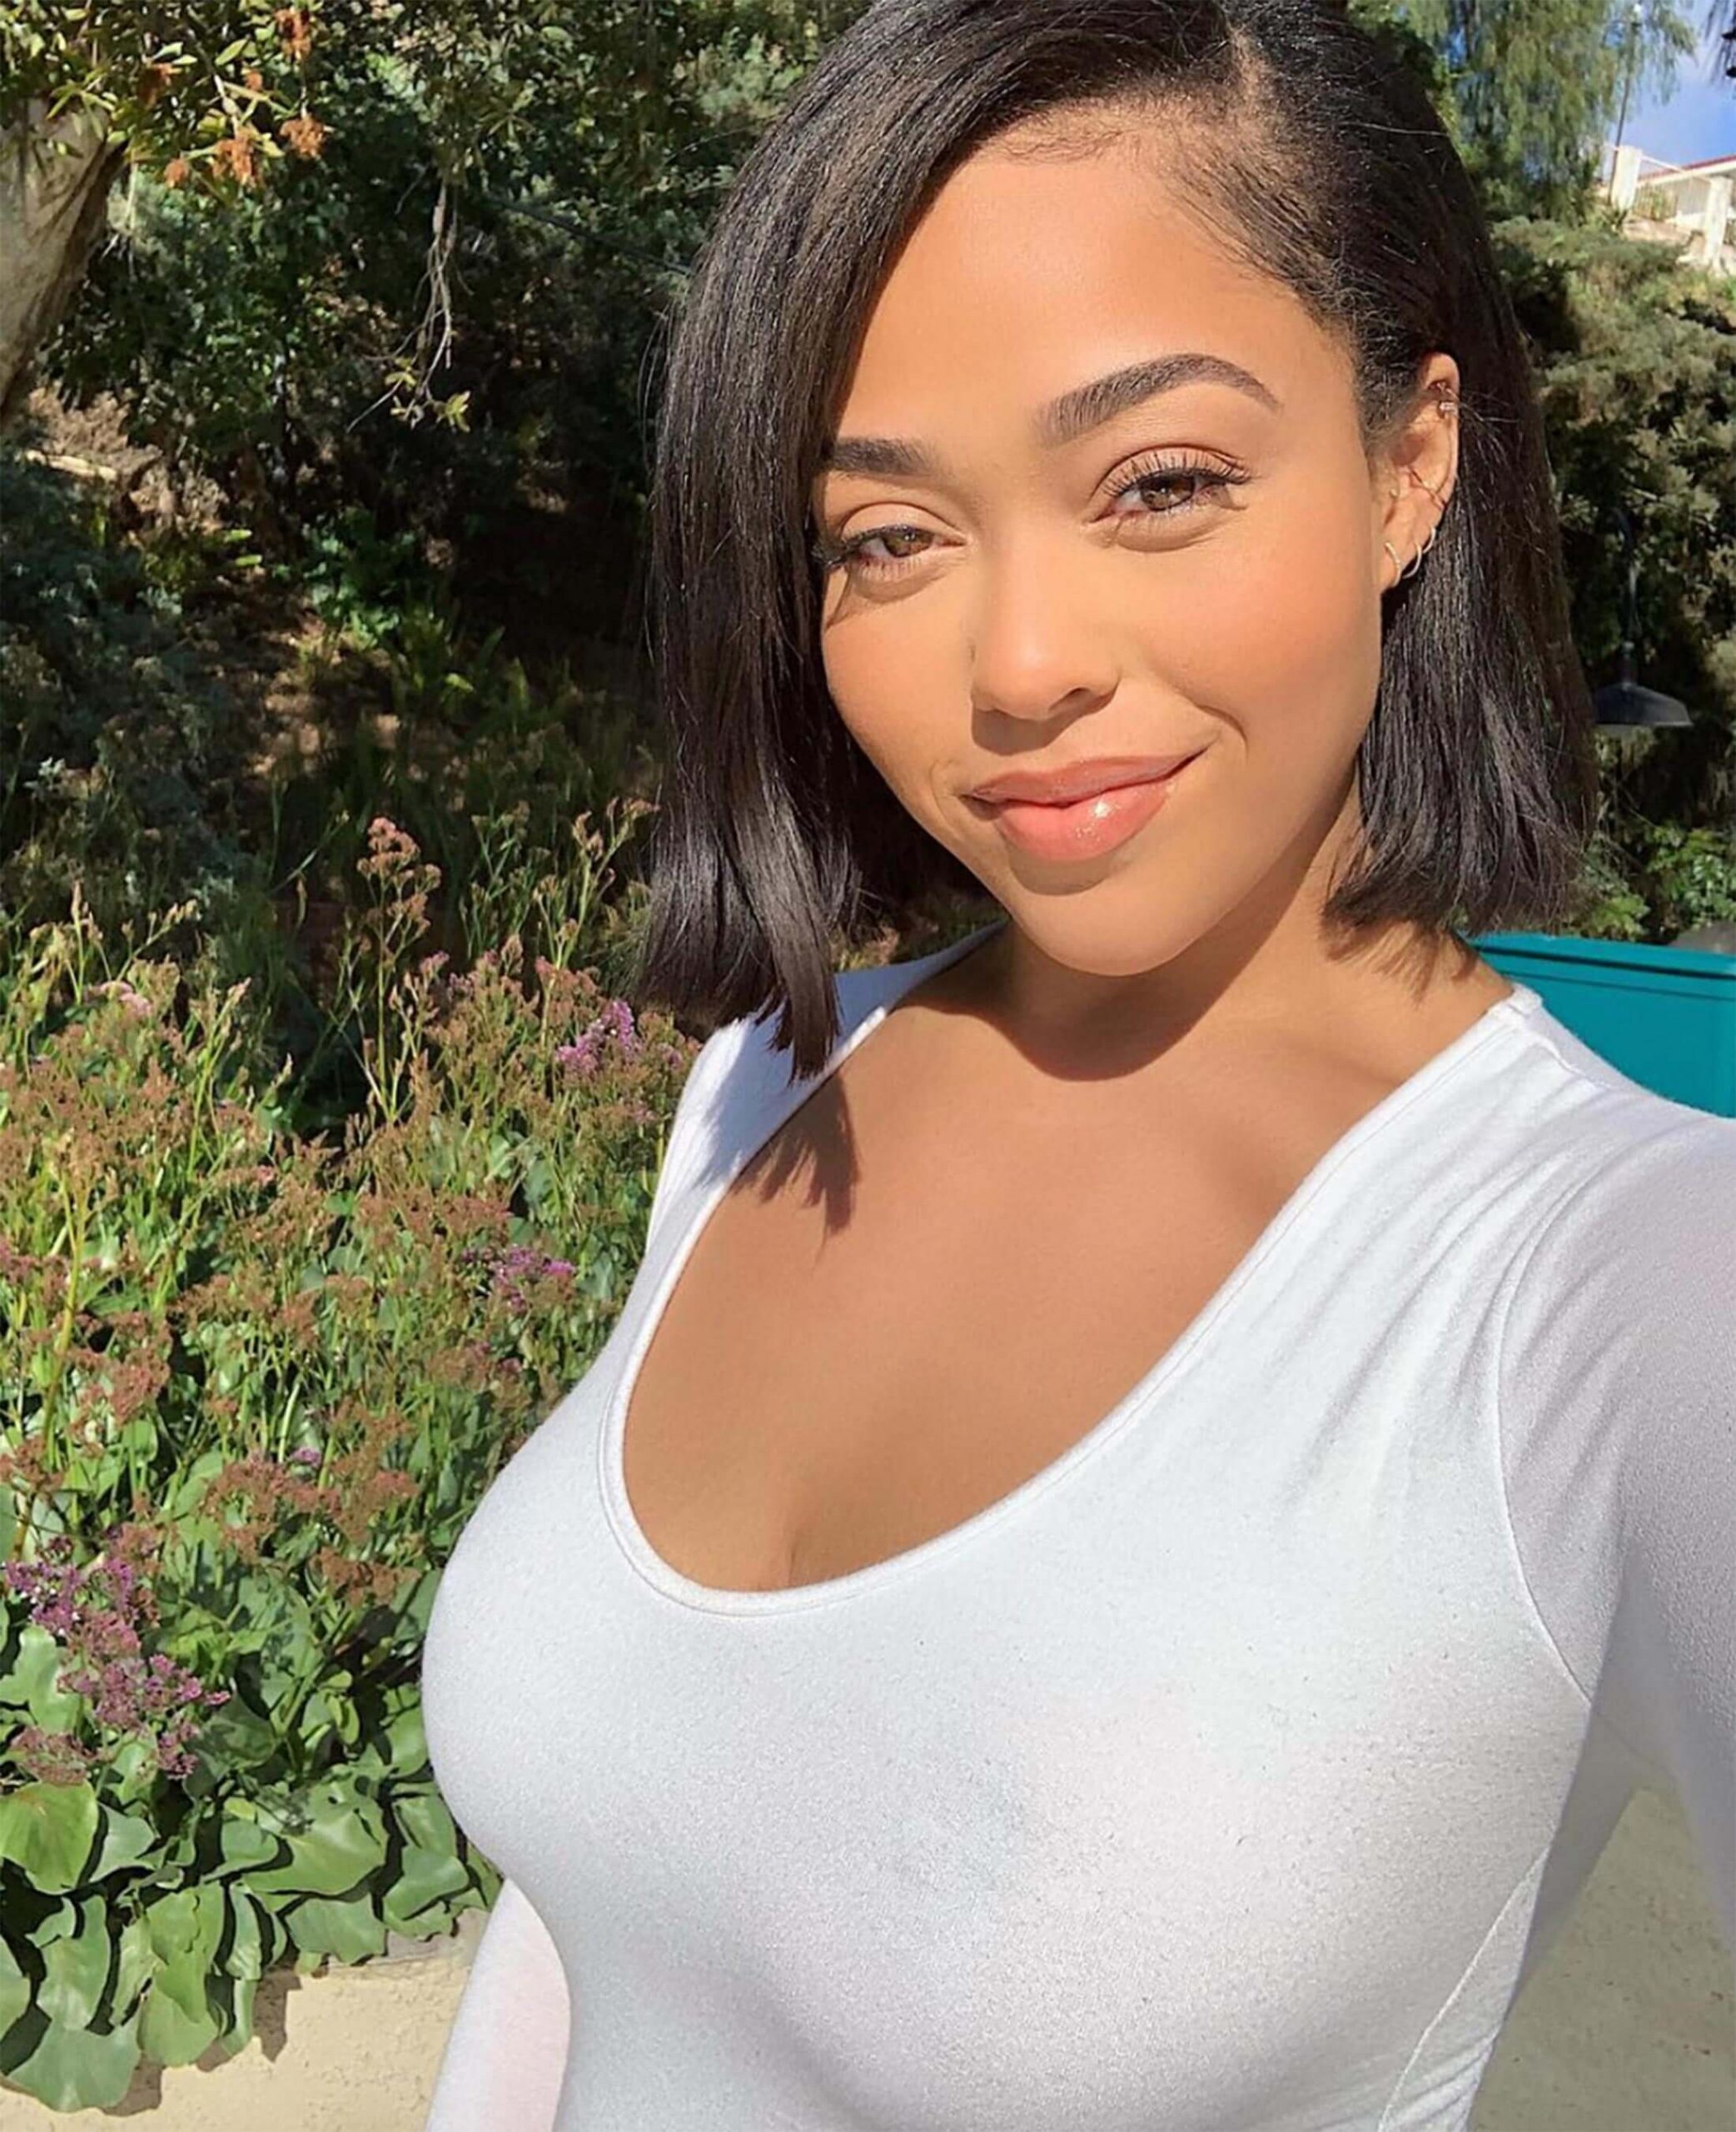 60+ Hot Pictures Of Jordyn Woods Which Will Make Your Day 117